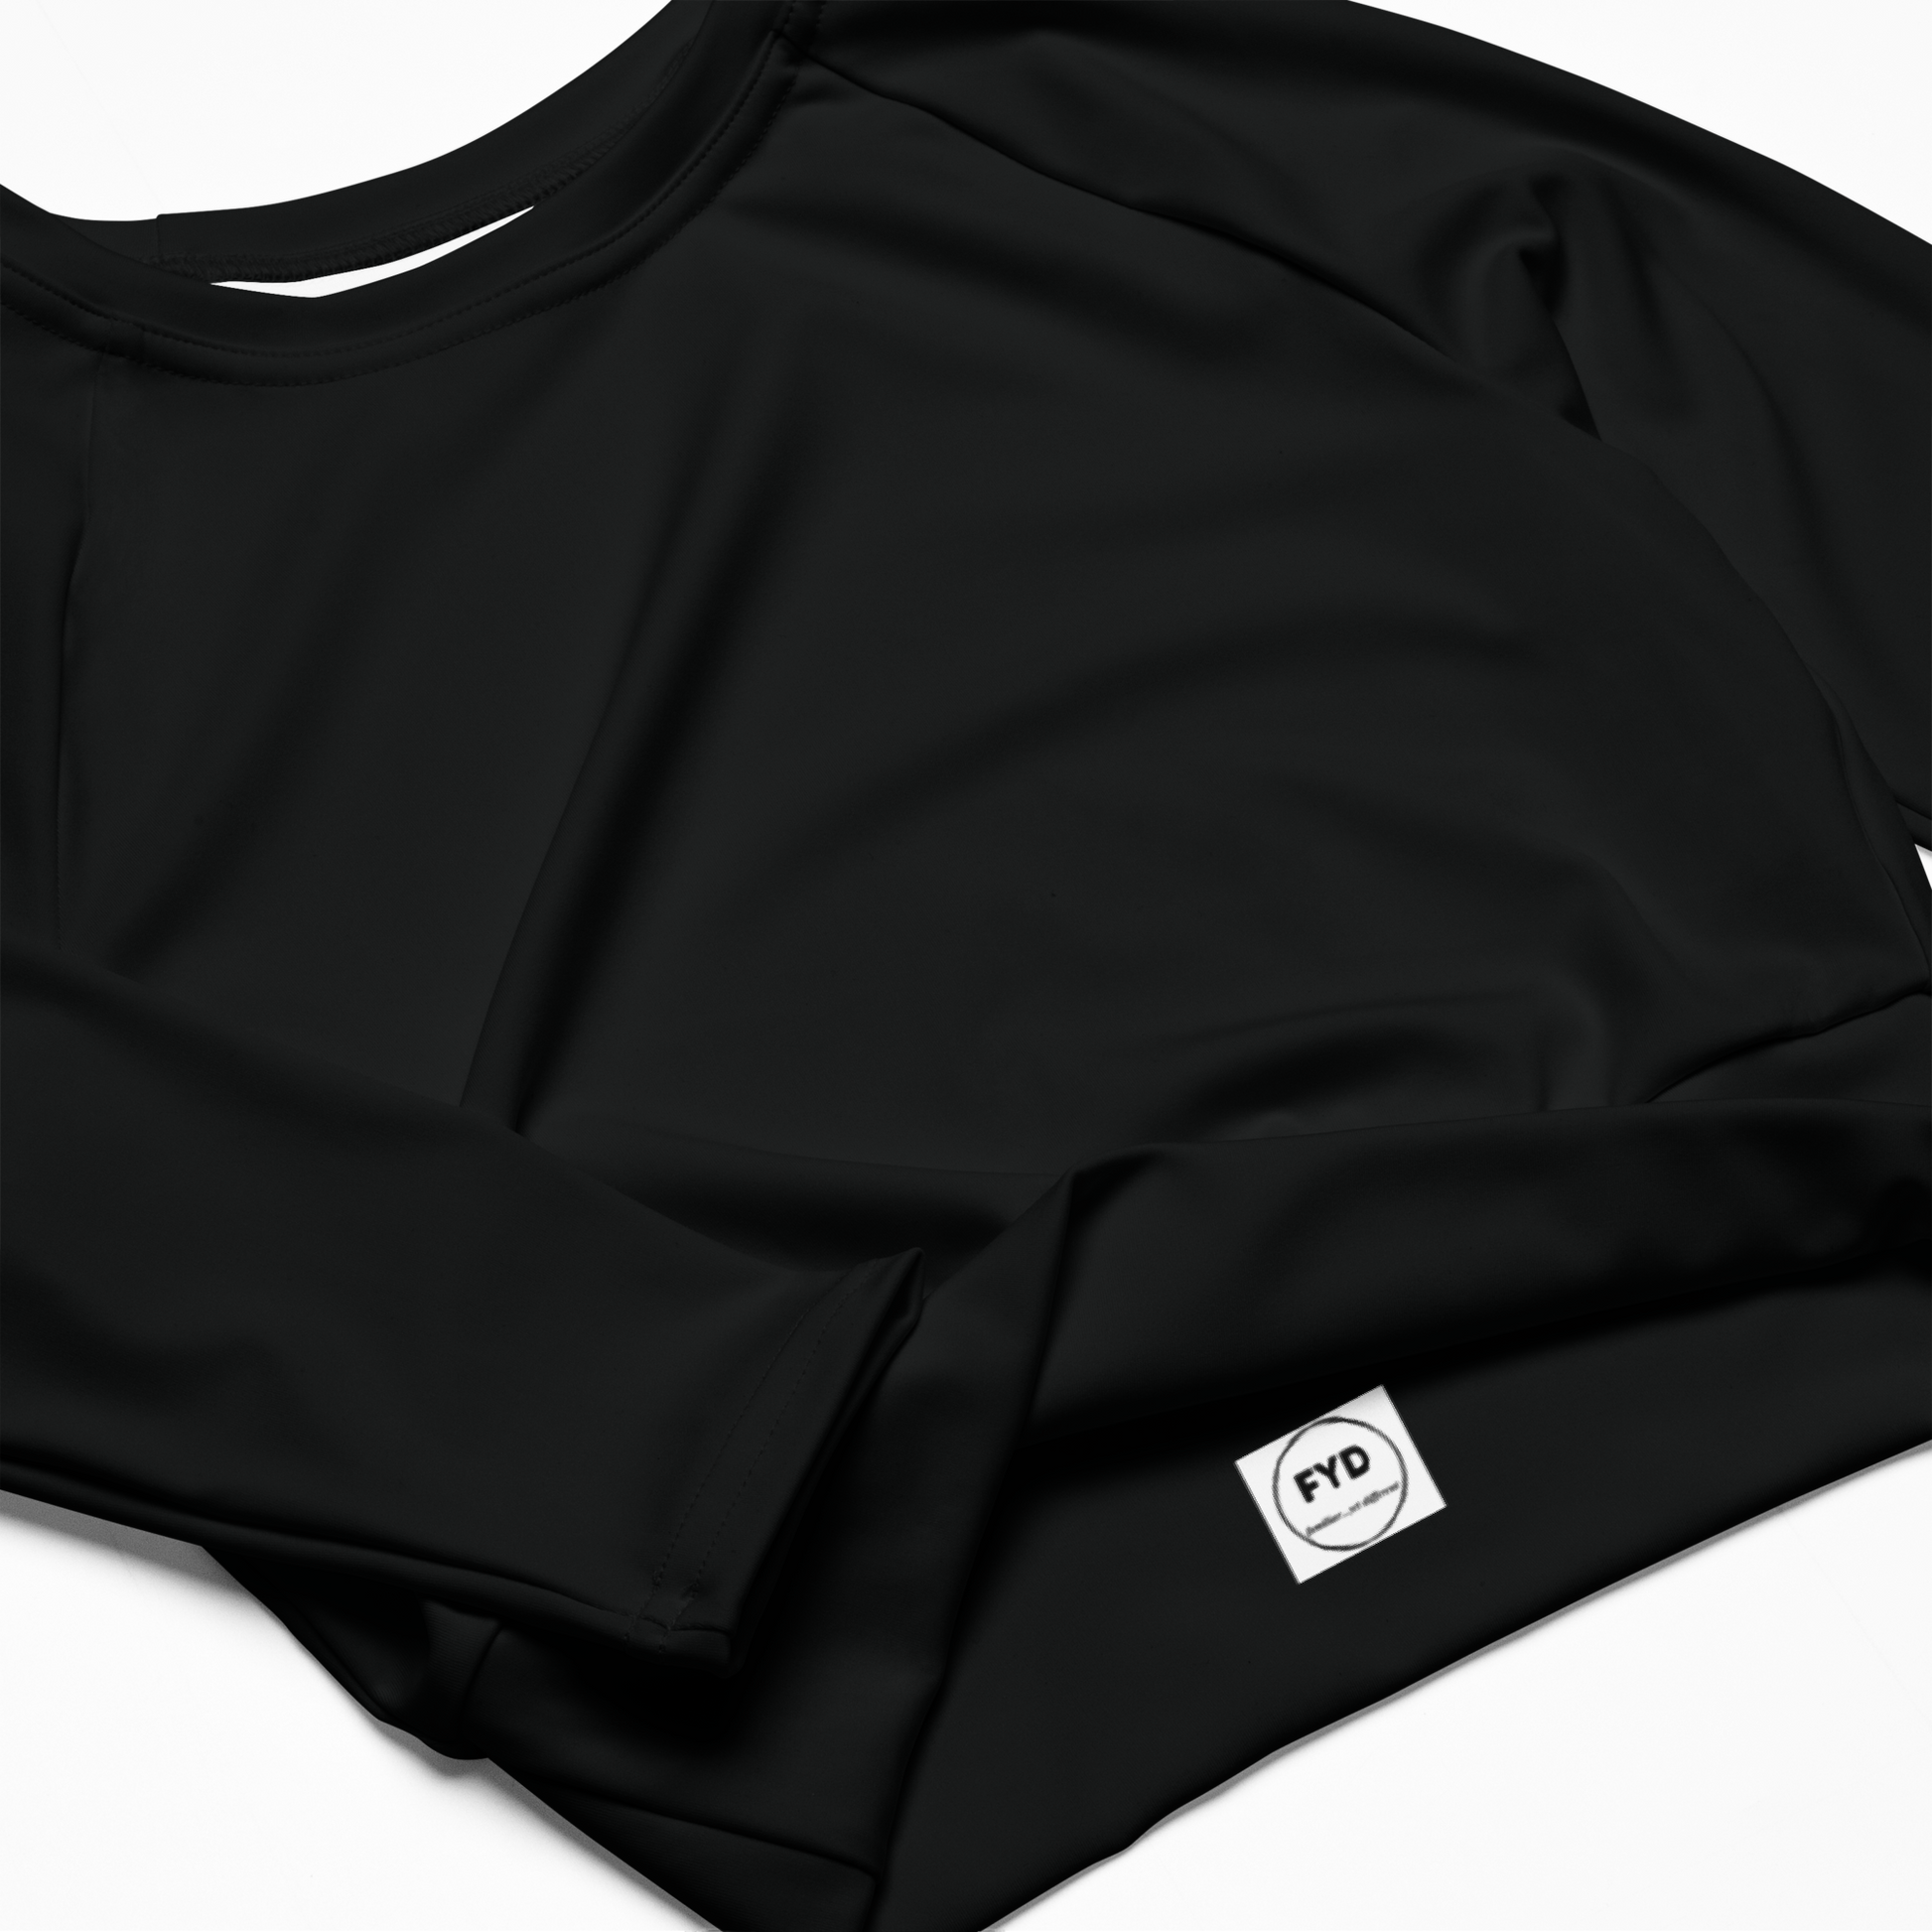 Recycled Long-Sleeve Crop Top in Black - familiar...yet different